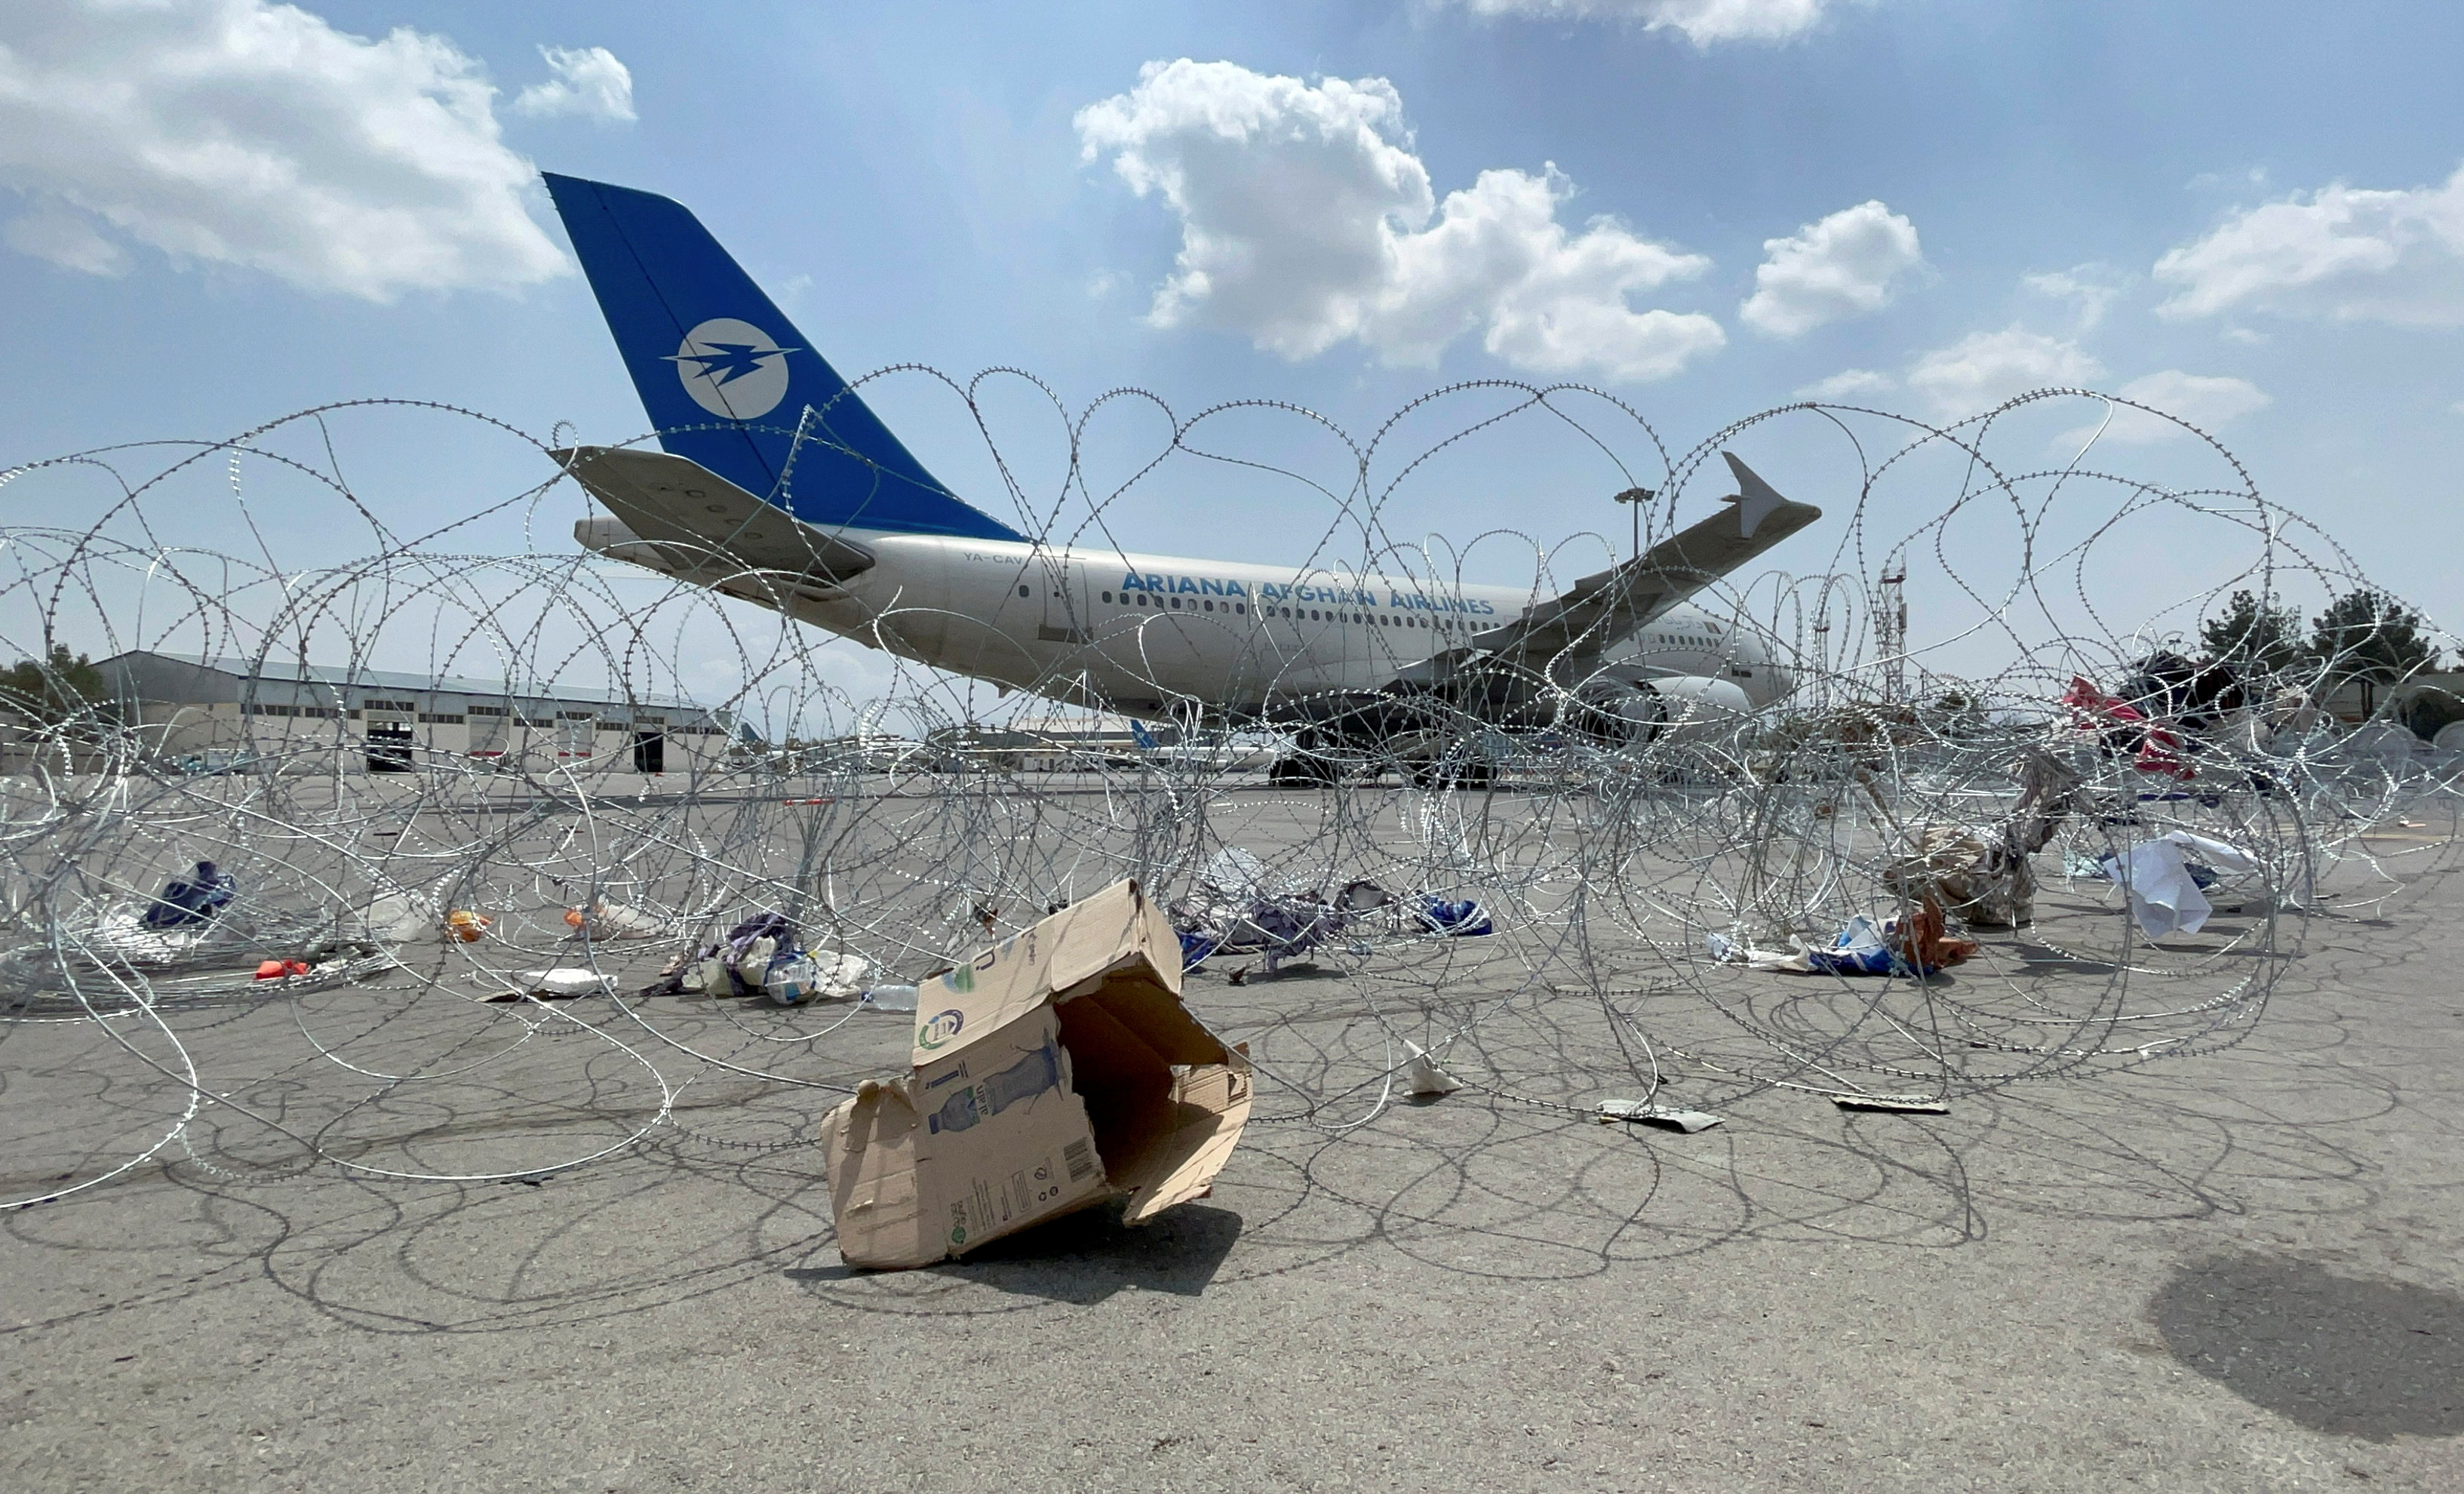 A commercial airplane is seen at the Hamid Karzai International Airport a day after U.S troops withdrawal in Kabul